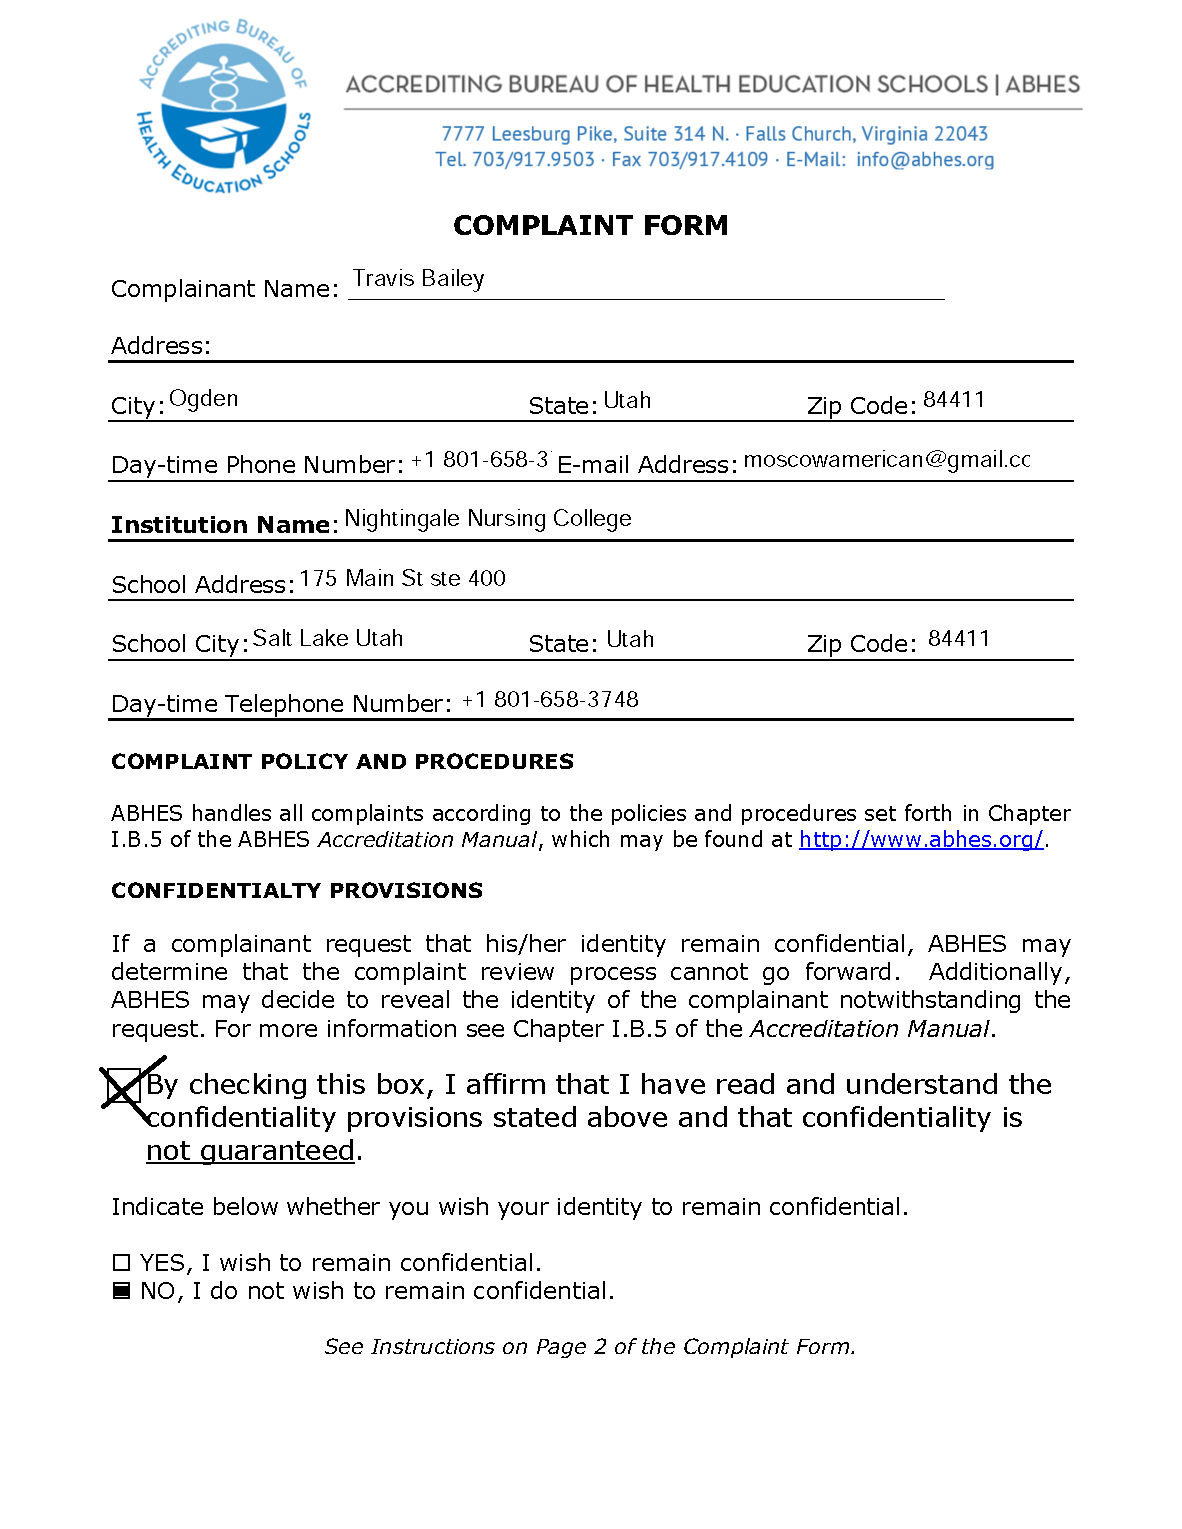 ABHES Complaint Form 2018 Page 1.png